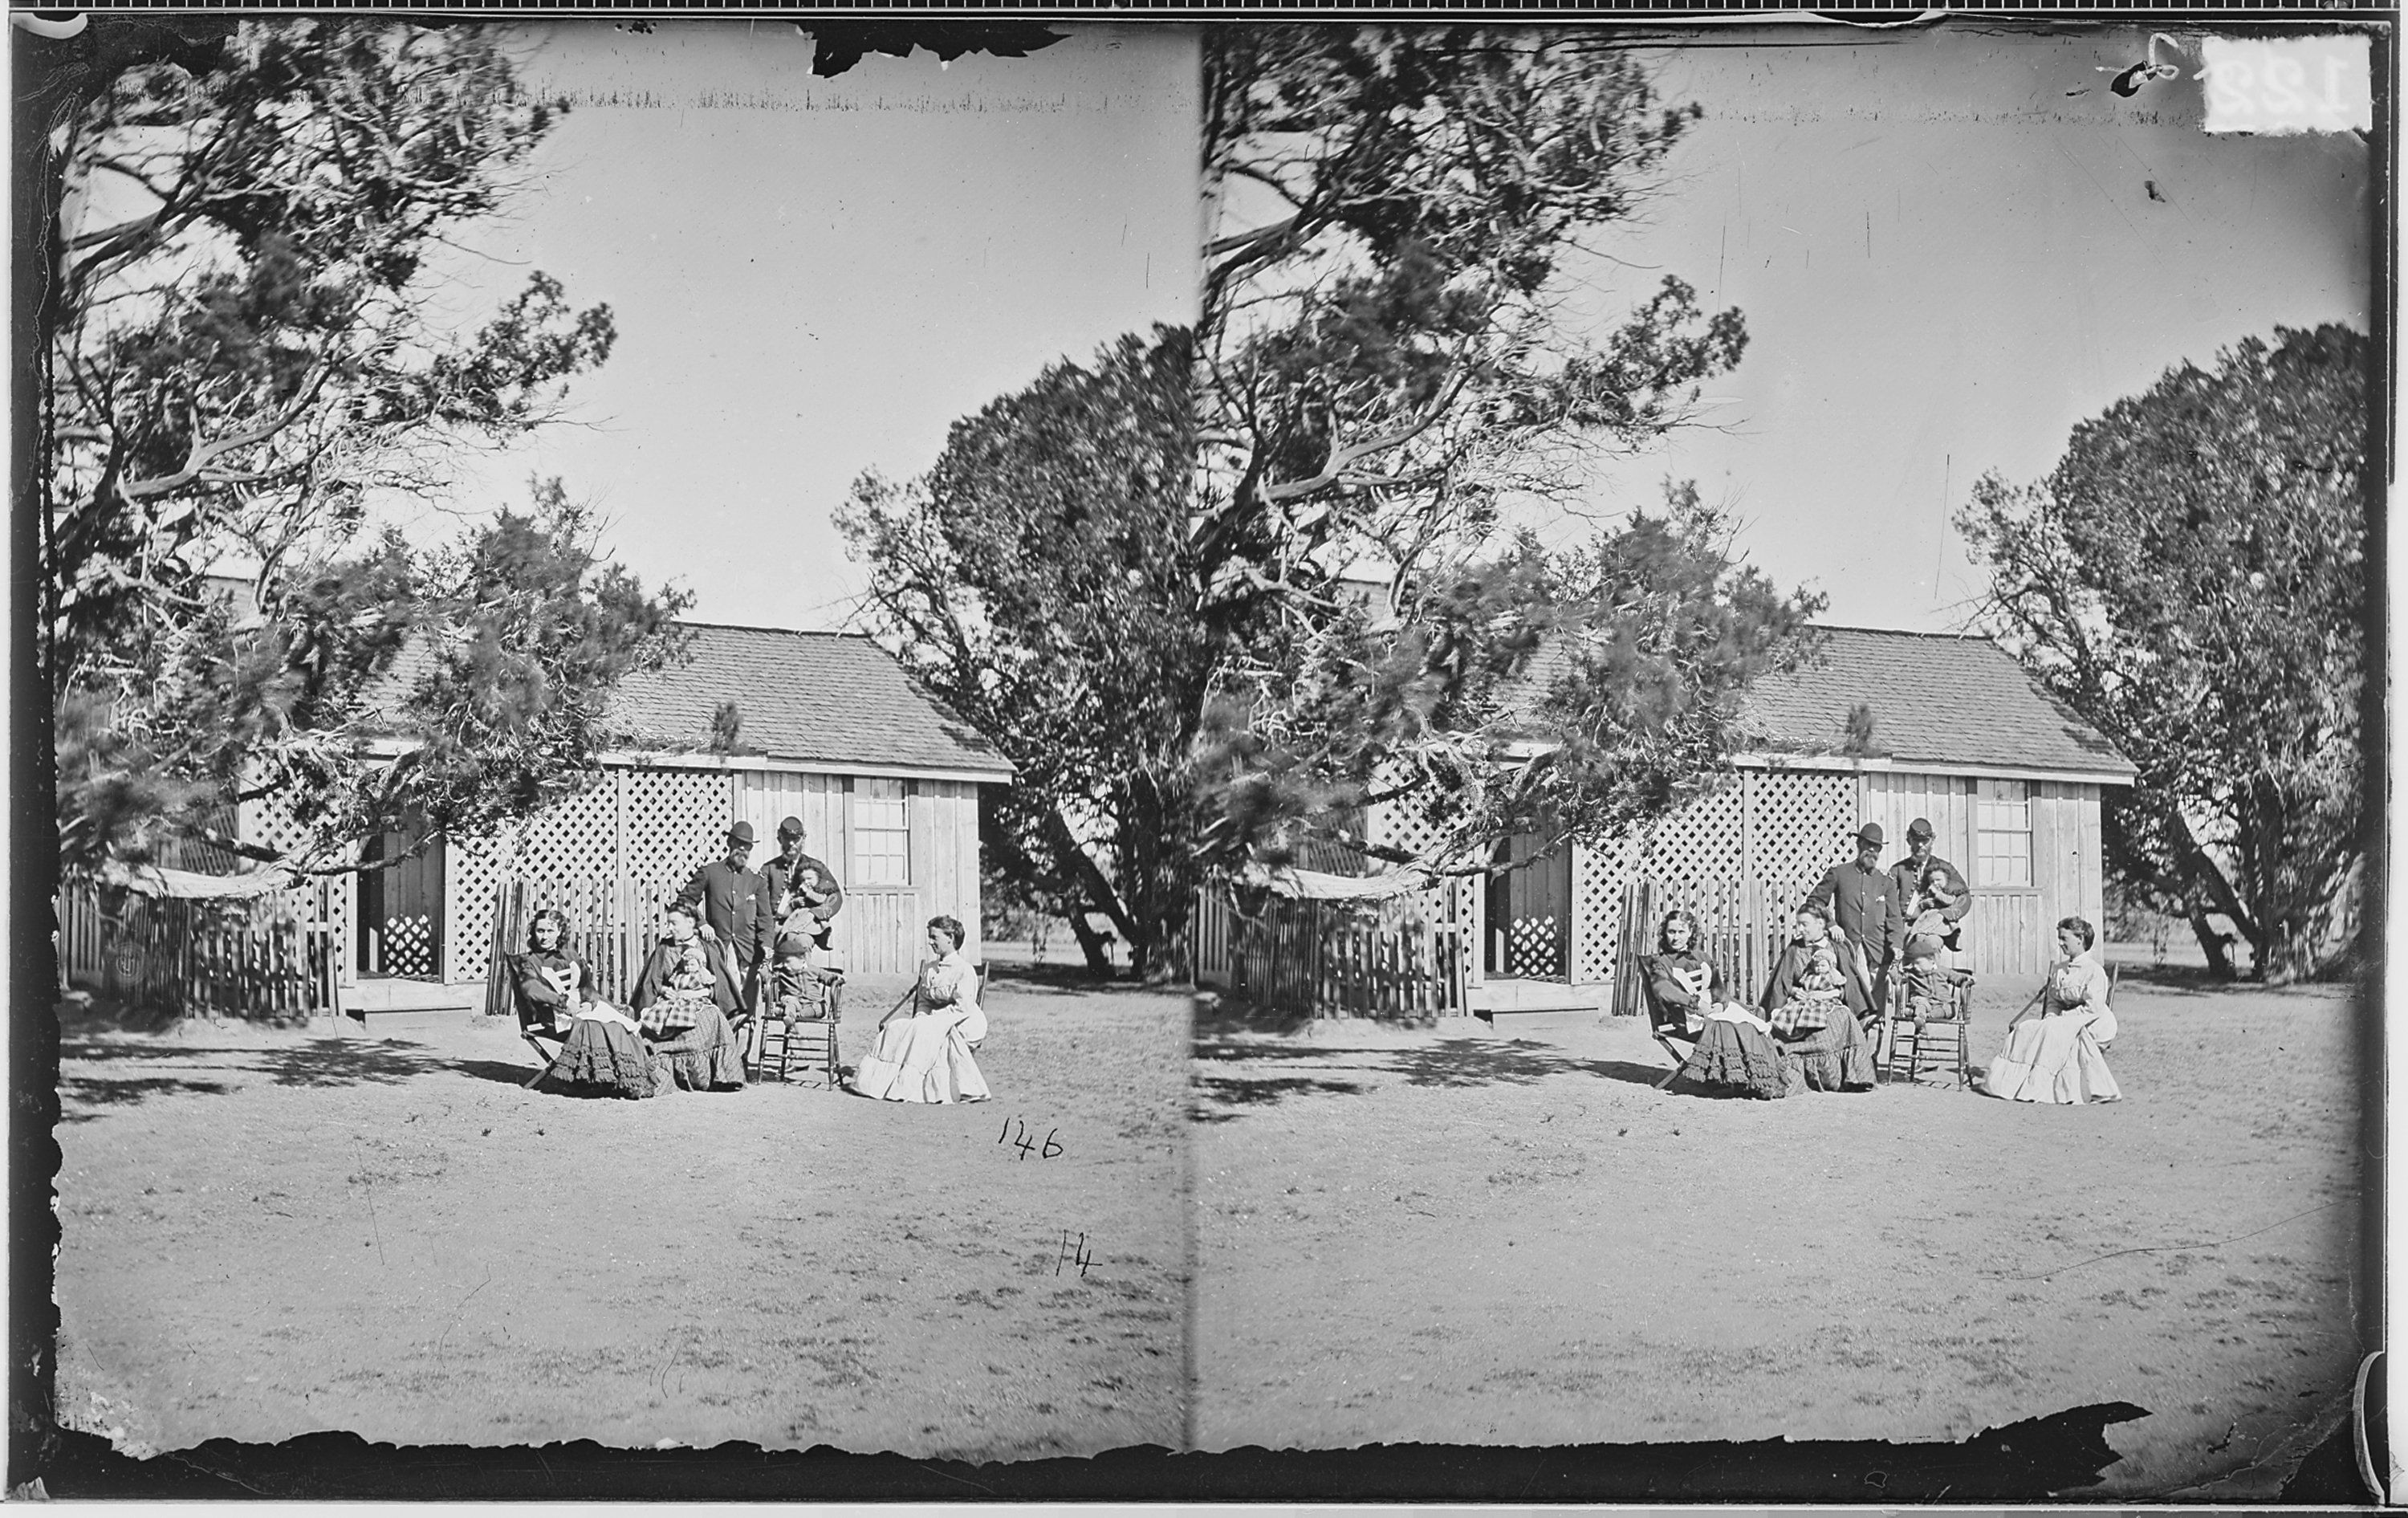 SOLDIERS AND WOMEN IN FRONT OF HOUSE - NARA - 523894